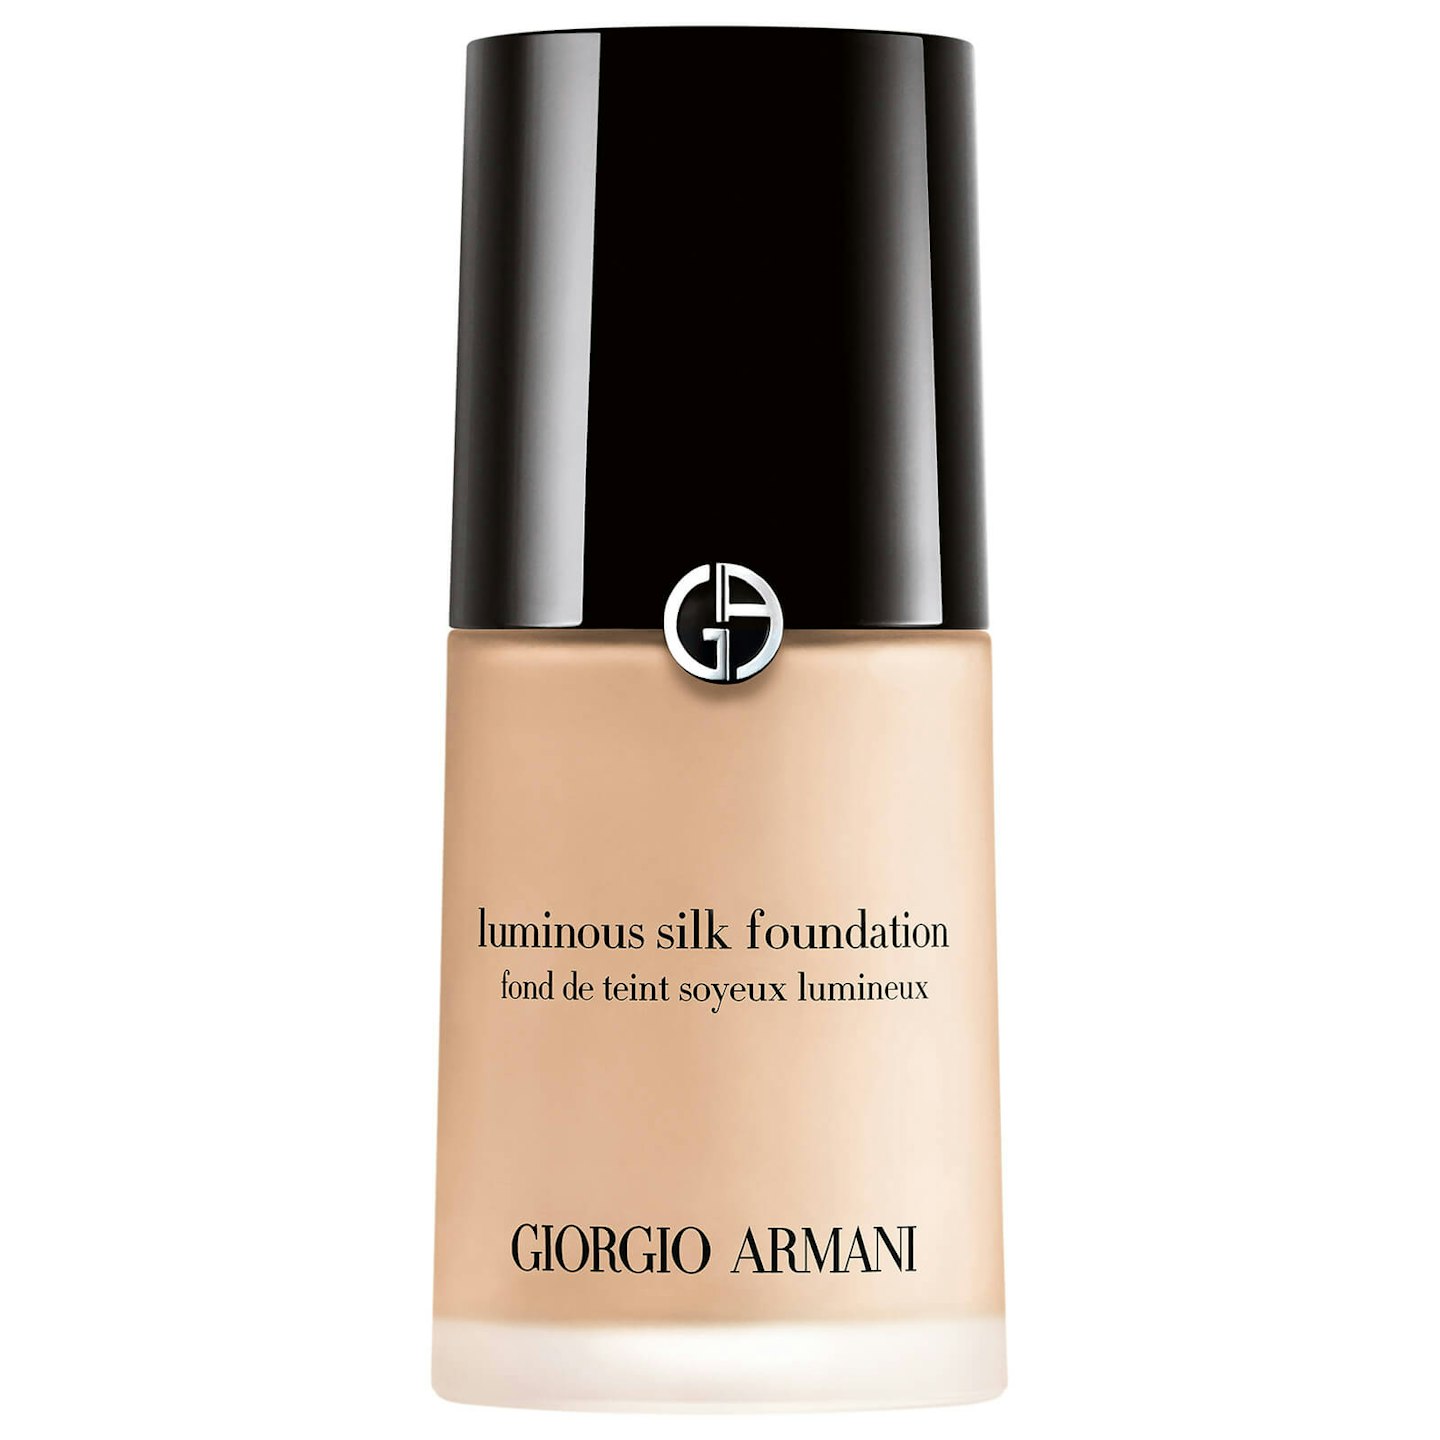 A picture of the Armani Luminous Silk Foundation